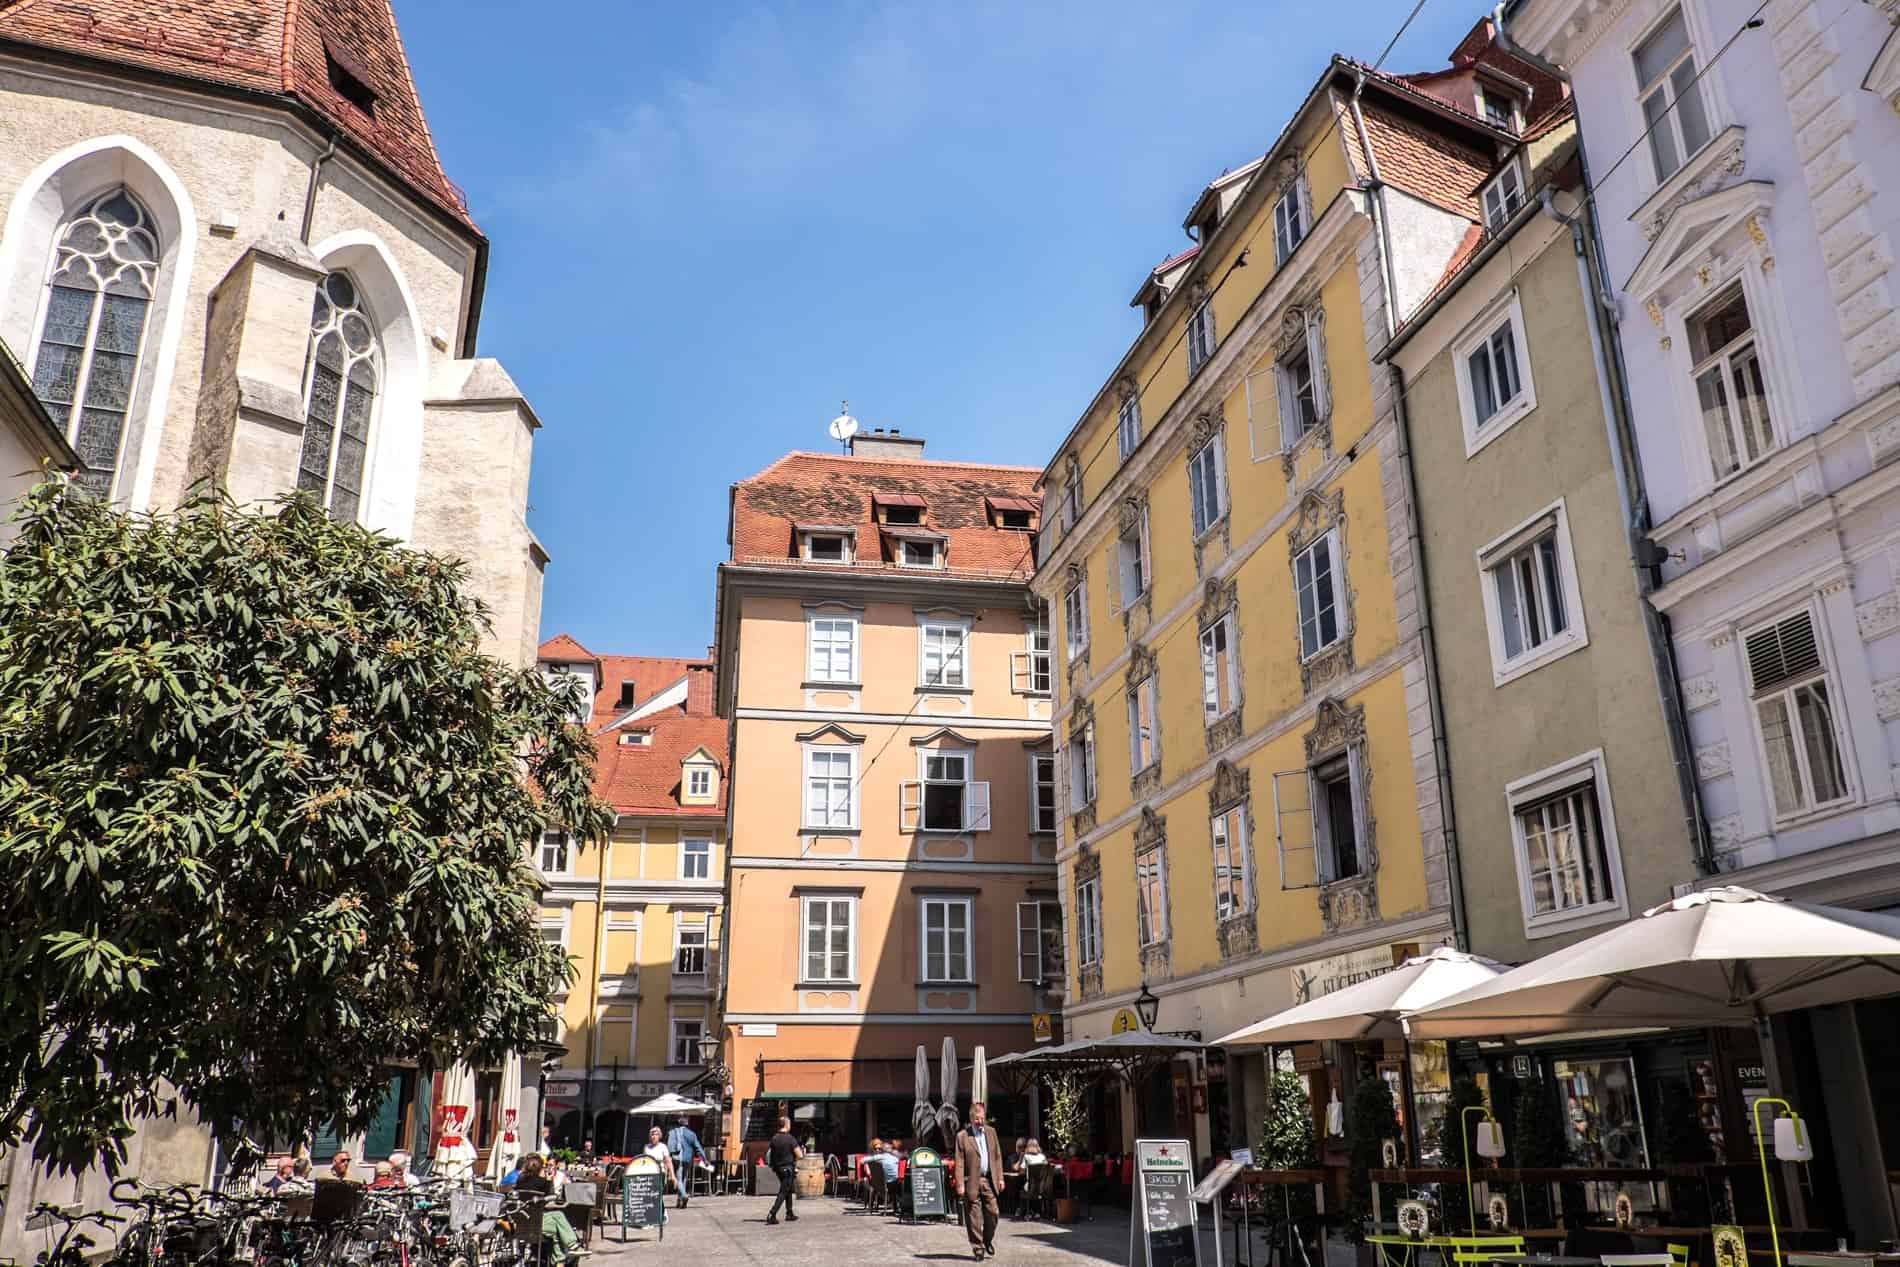 Yellow-hued, Mediterranean style buildings and open squares in the old centre of Graz, Austria. 